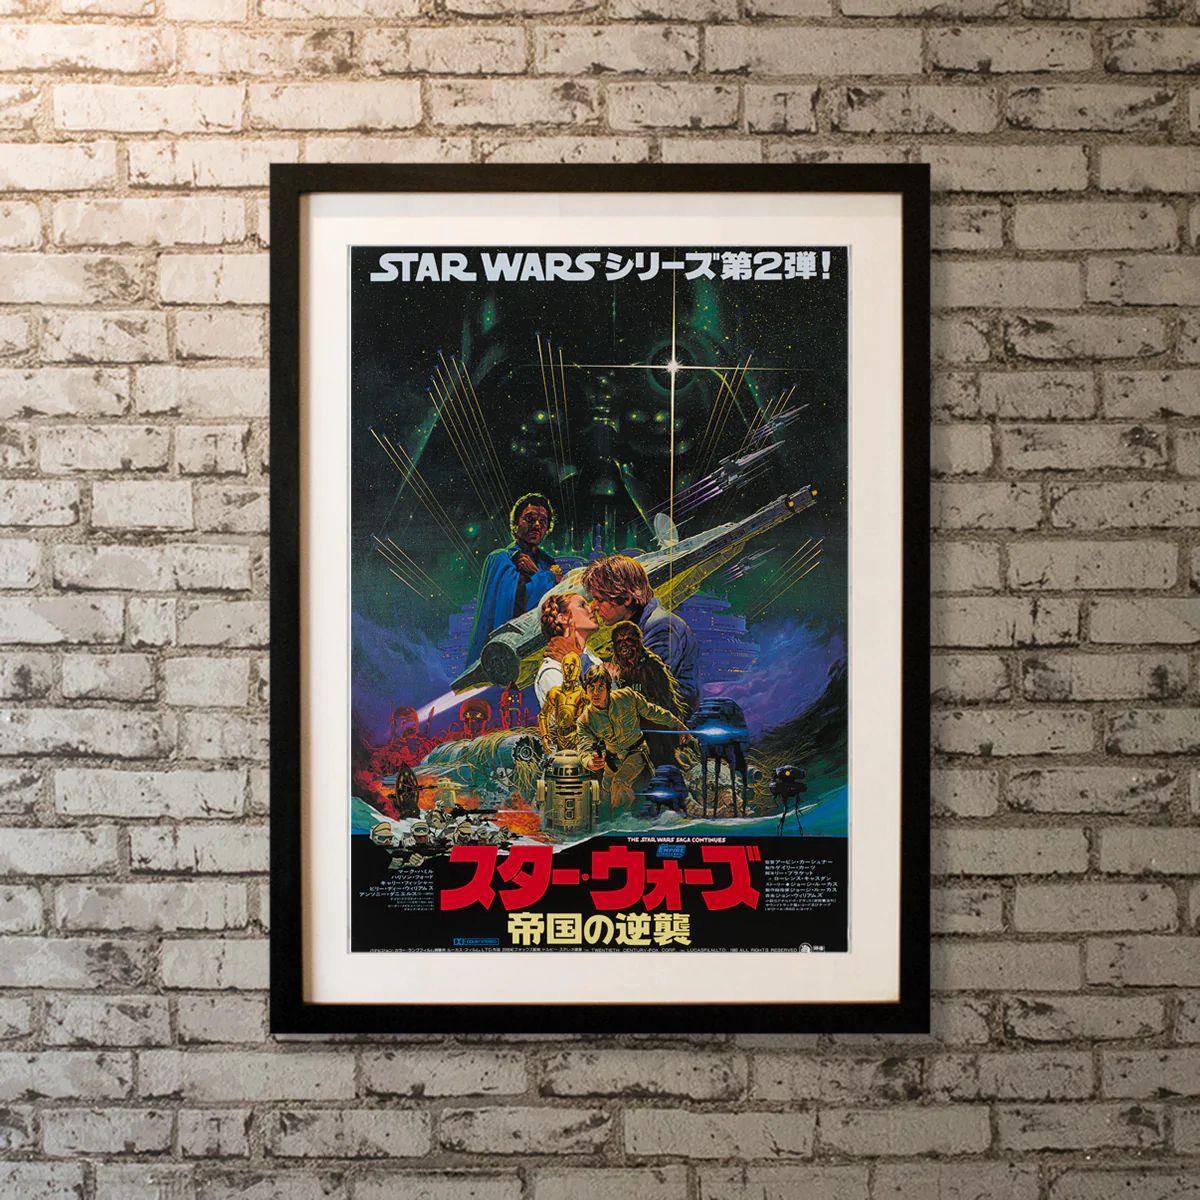 Star Wars: The Empire Strikes Back, unframed poster, 1980.

Japanese B2 (20 X 29 Inches). After the Rebels are brutally overpowered by the Empire on the ice planet Hoth, Luke Skywalker begins Jedi training with Yoda, while his friends are pursued